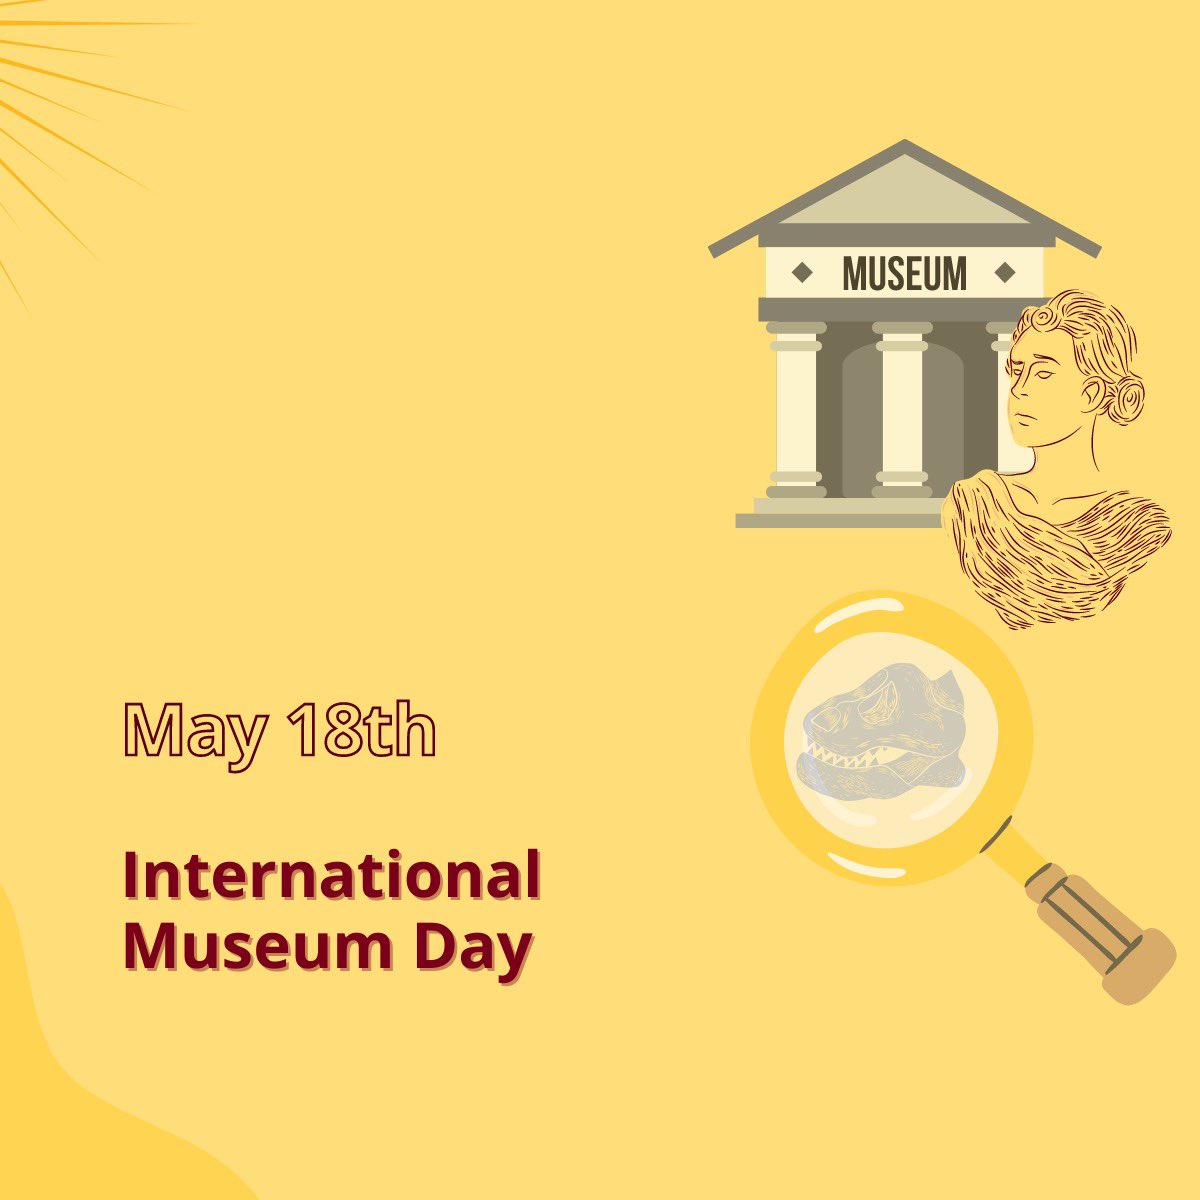 🏛Today is International Museum Day! 🔎Did you know there are 55 museums in the Minneapolis metropolitan area? Have you visited these museums in/near @UMNews campus? 🔭Bell Museum @BellMuseum 🎨Weisman Art Museum @weismanart 🖌 Goldstein Museum of Design @GoldsteinMuseum